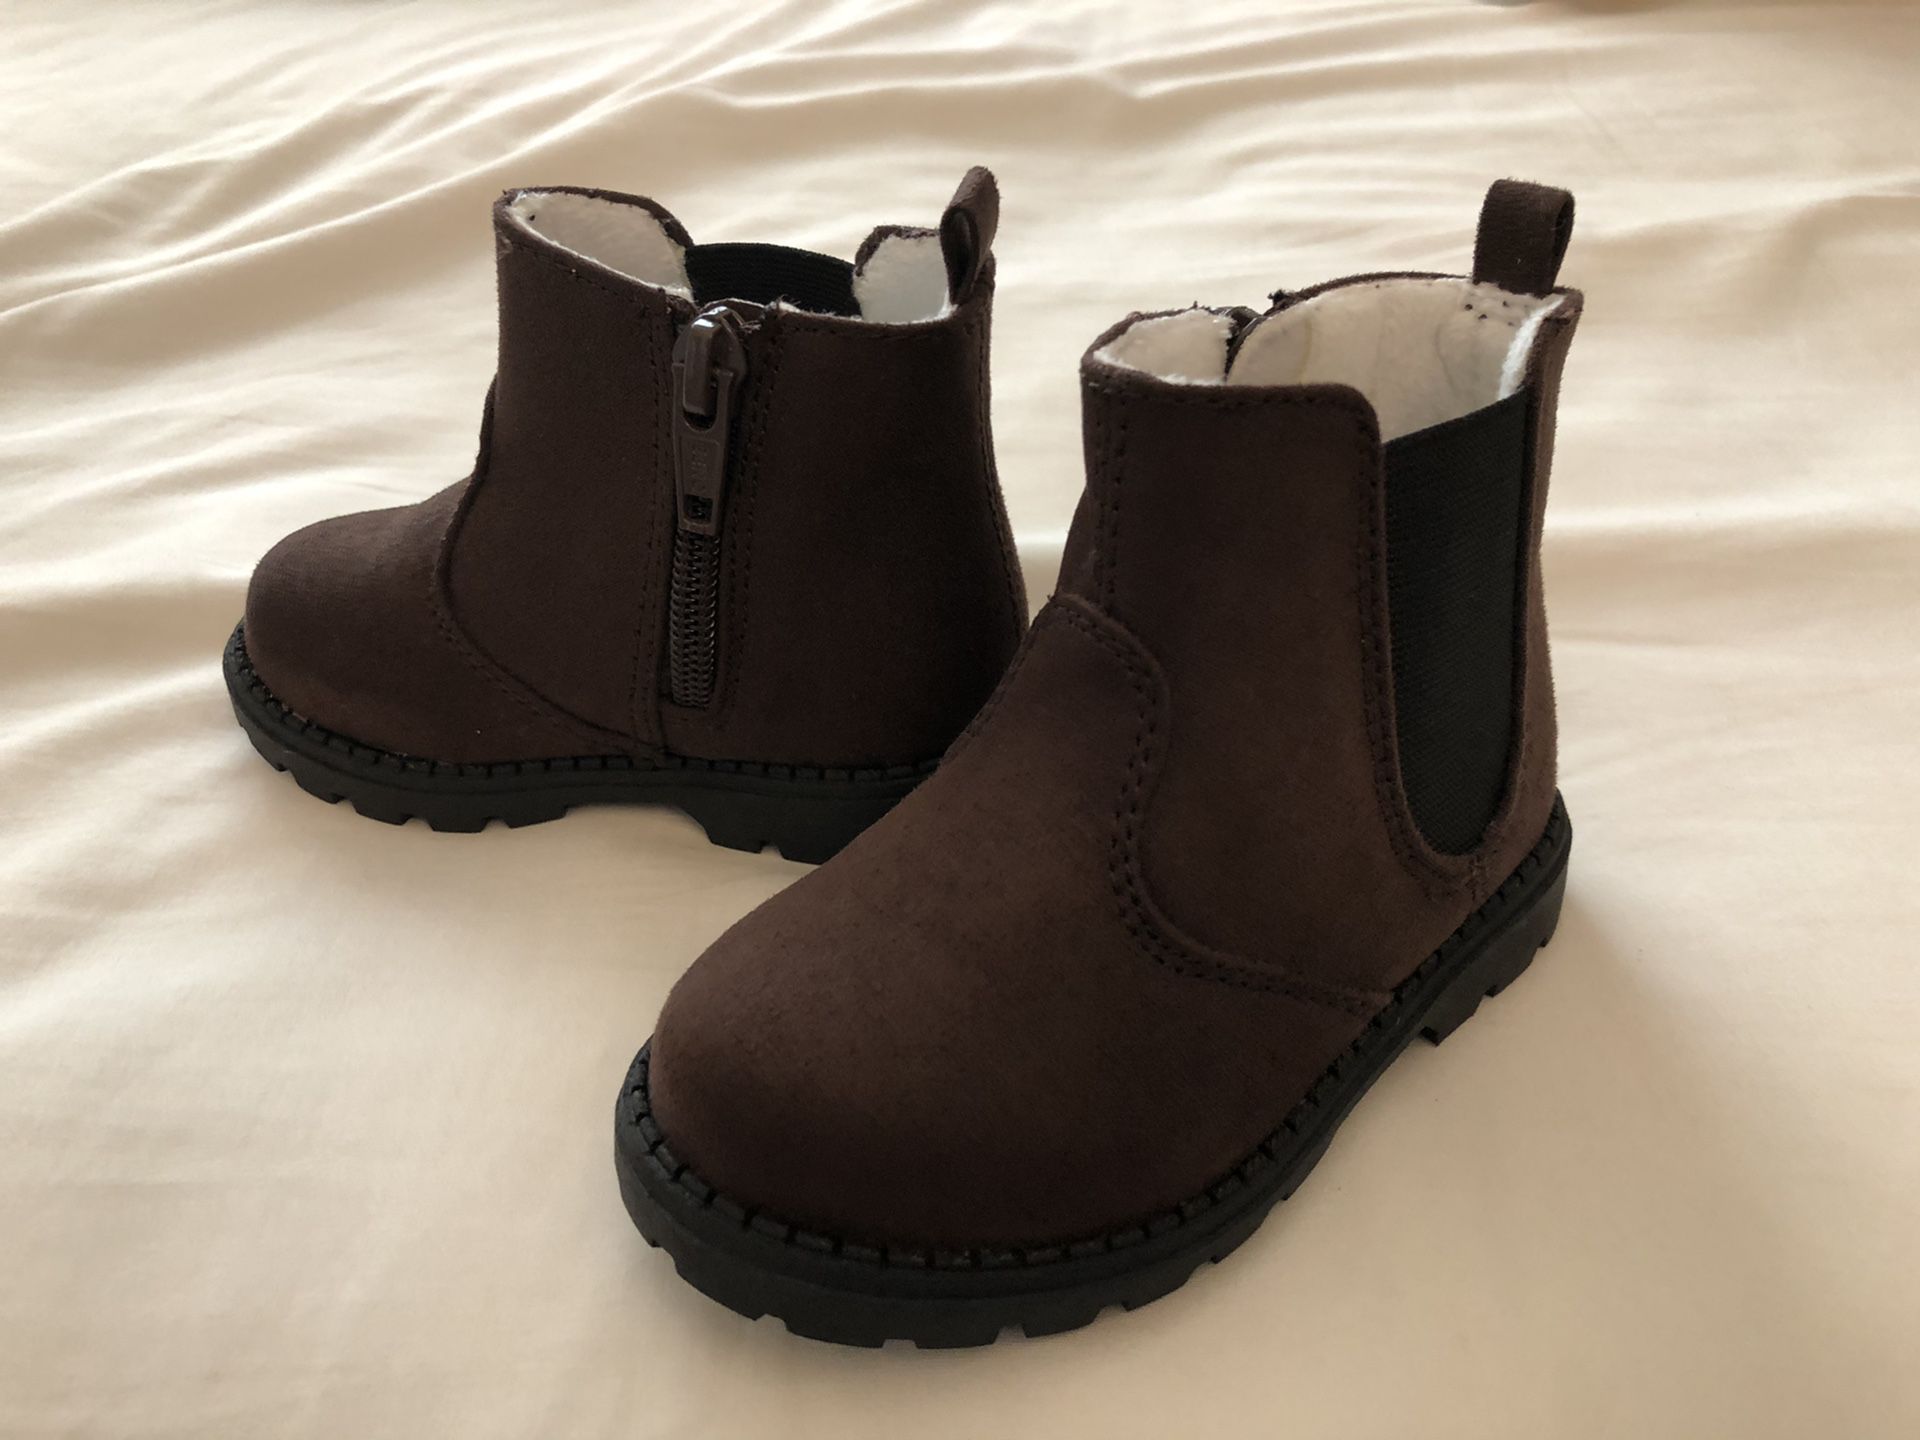 Brand new toddler girls boots from H&M size 4-5 lightly lined dark brown baby